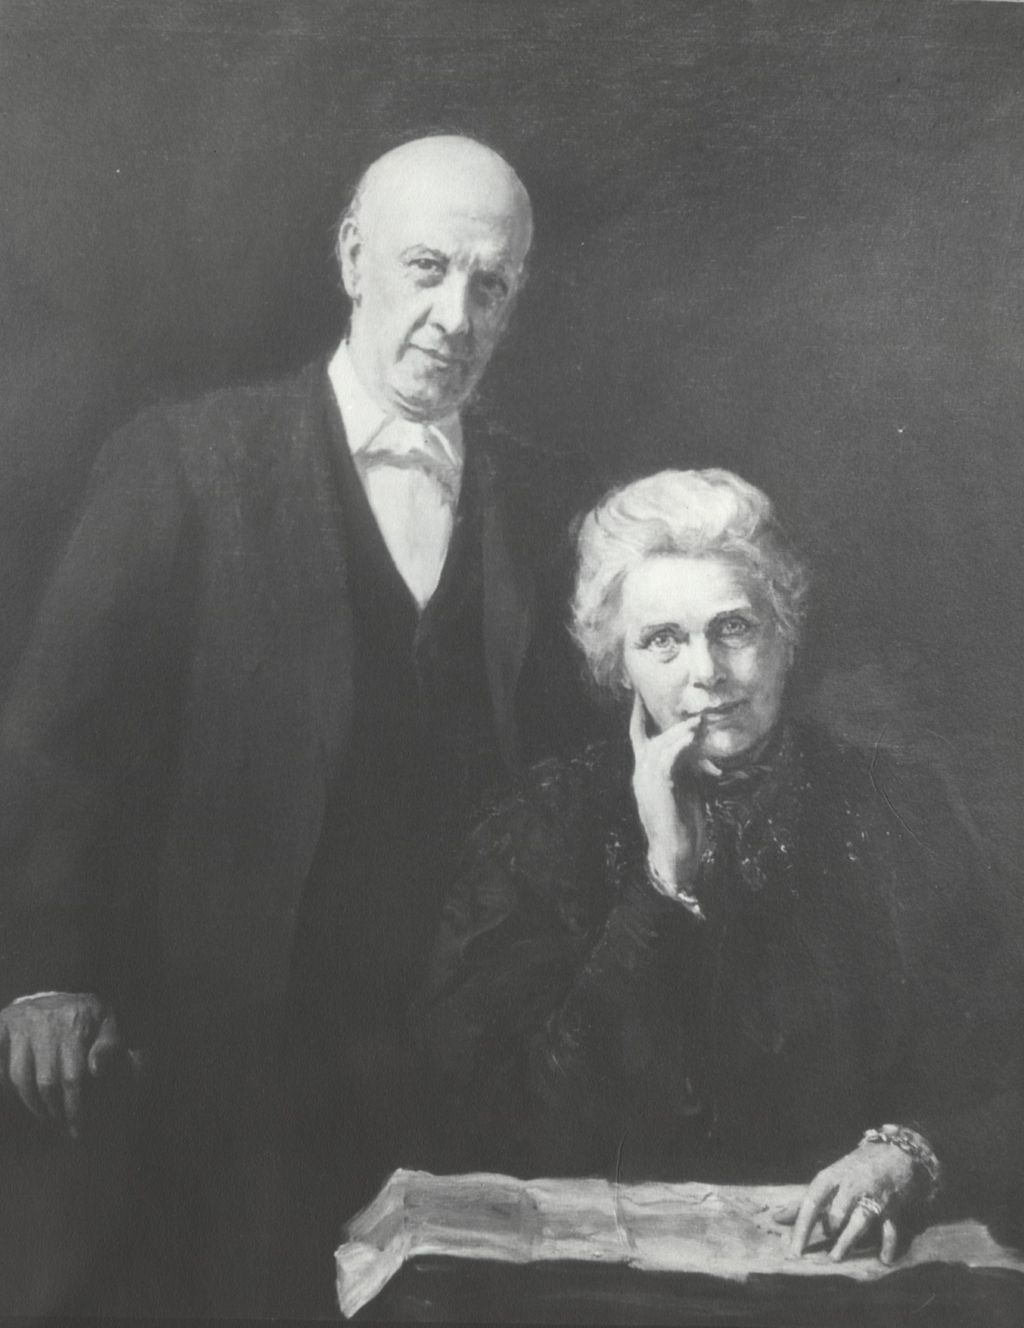 Painted portrait of Samuel and Henrietta Barnett, co-founders of Toynbee Hall in London